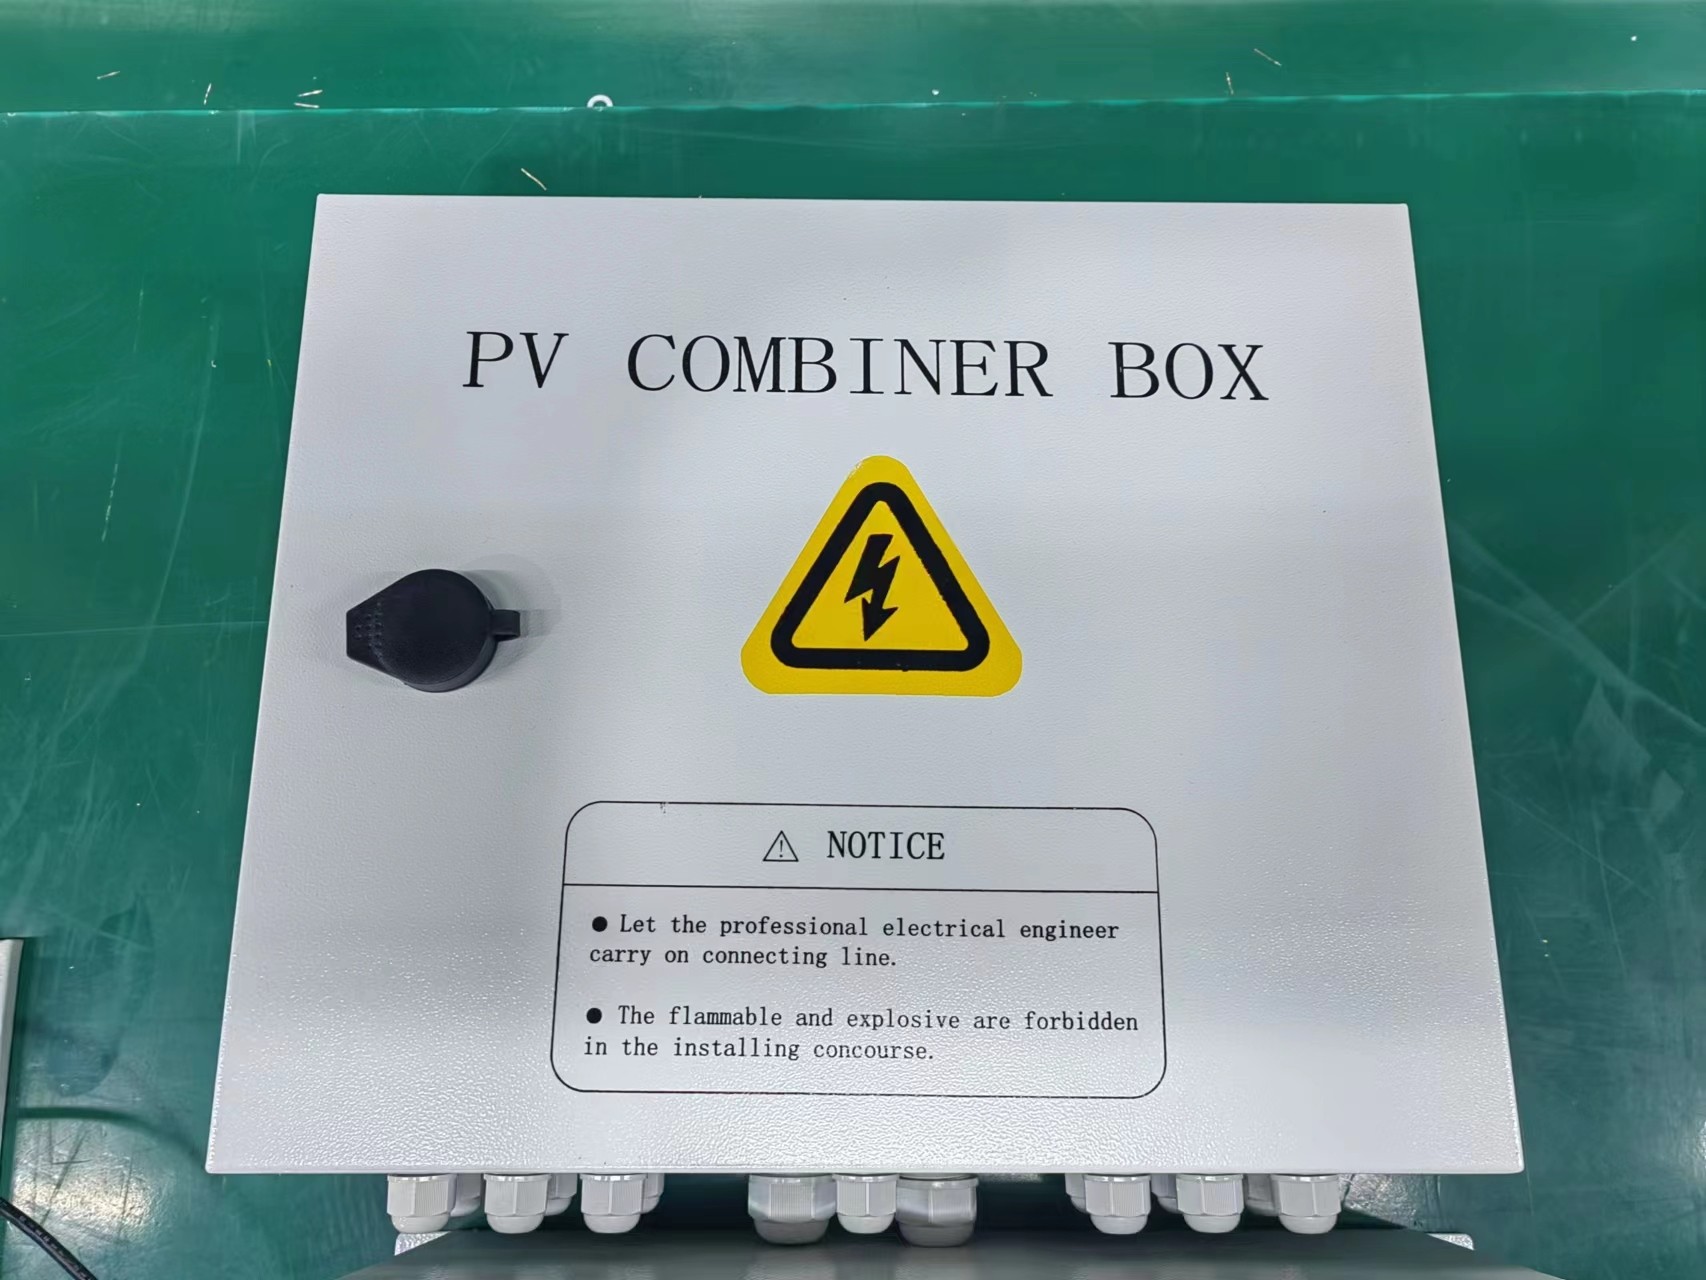 What is Combiner box? The Combiner box in photovoltaic power generation